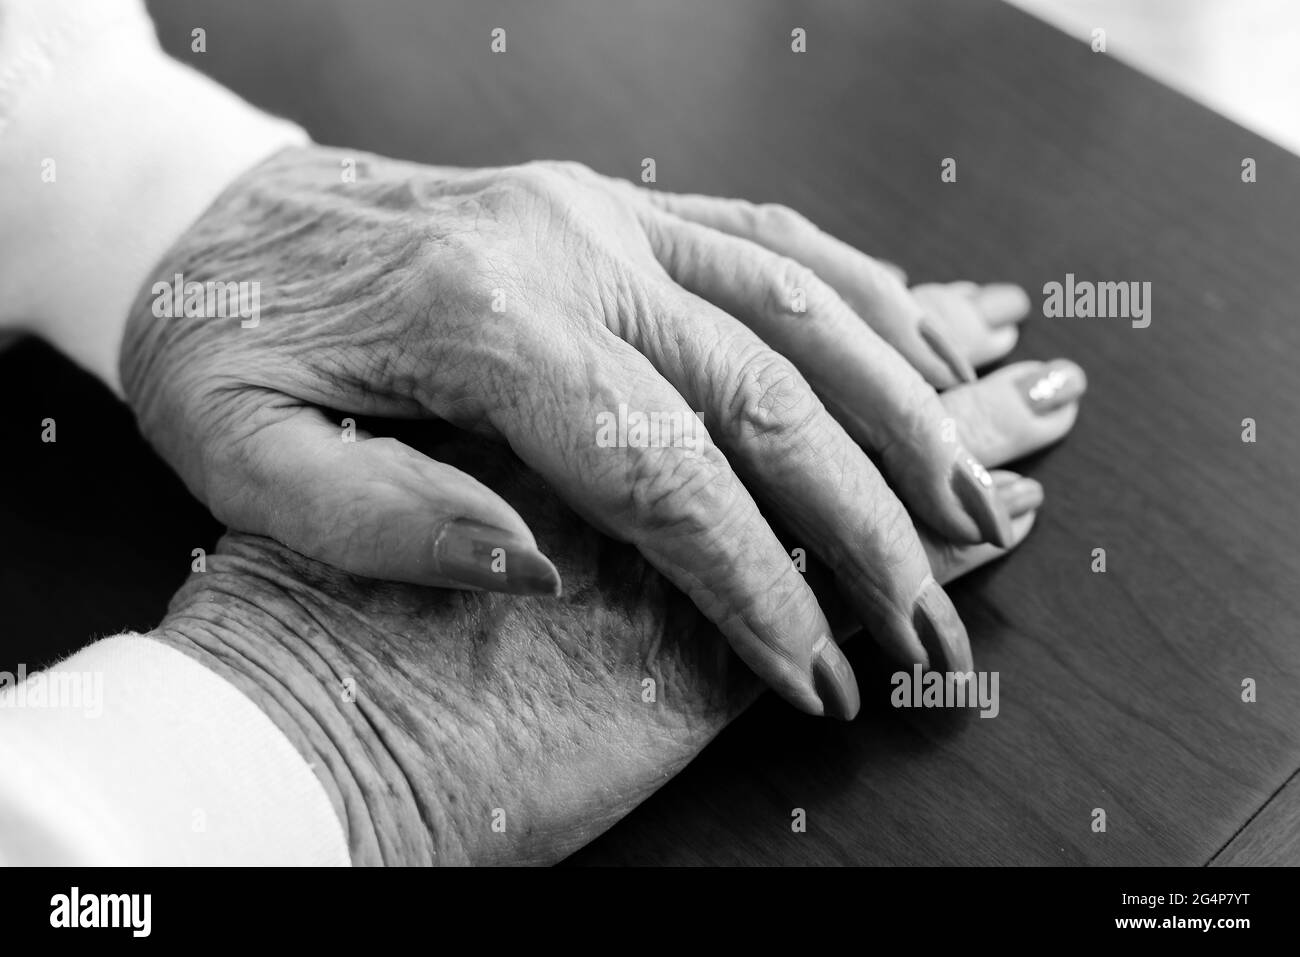 A close up concept photo of a pair of wringled and aged hands from an elederly woman. Stock Photo